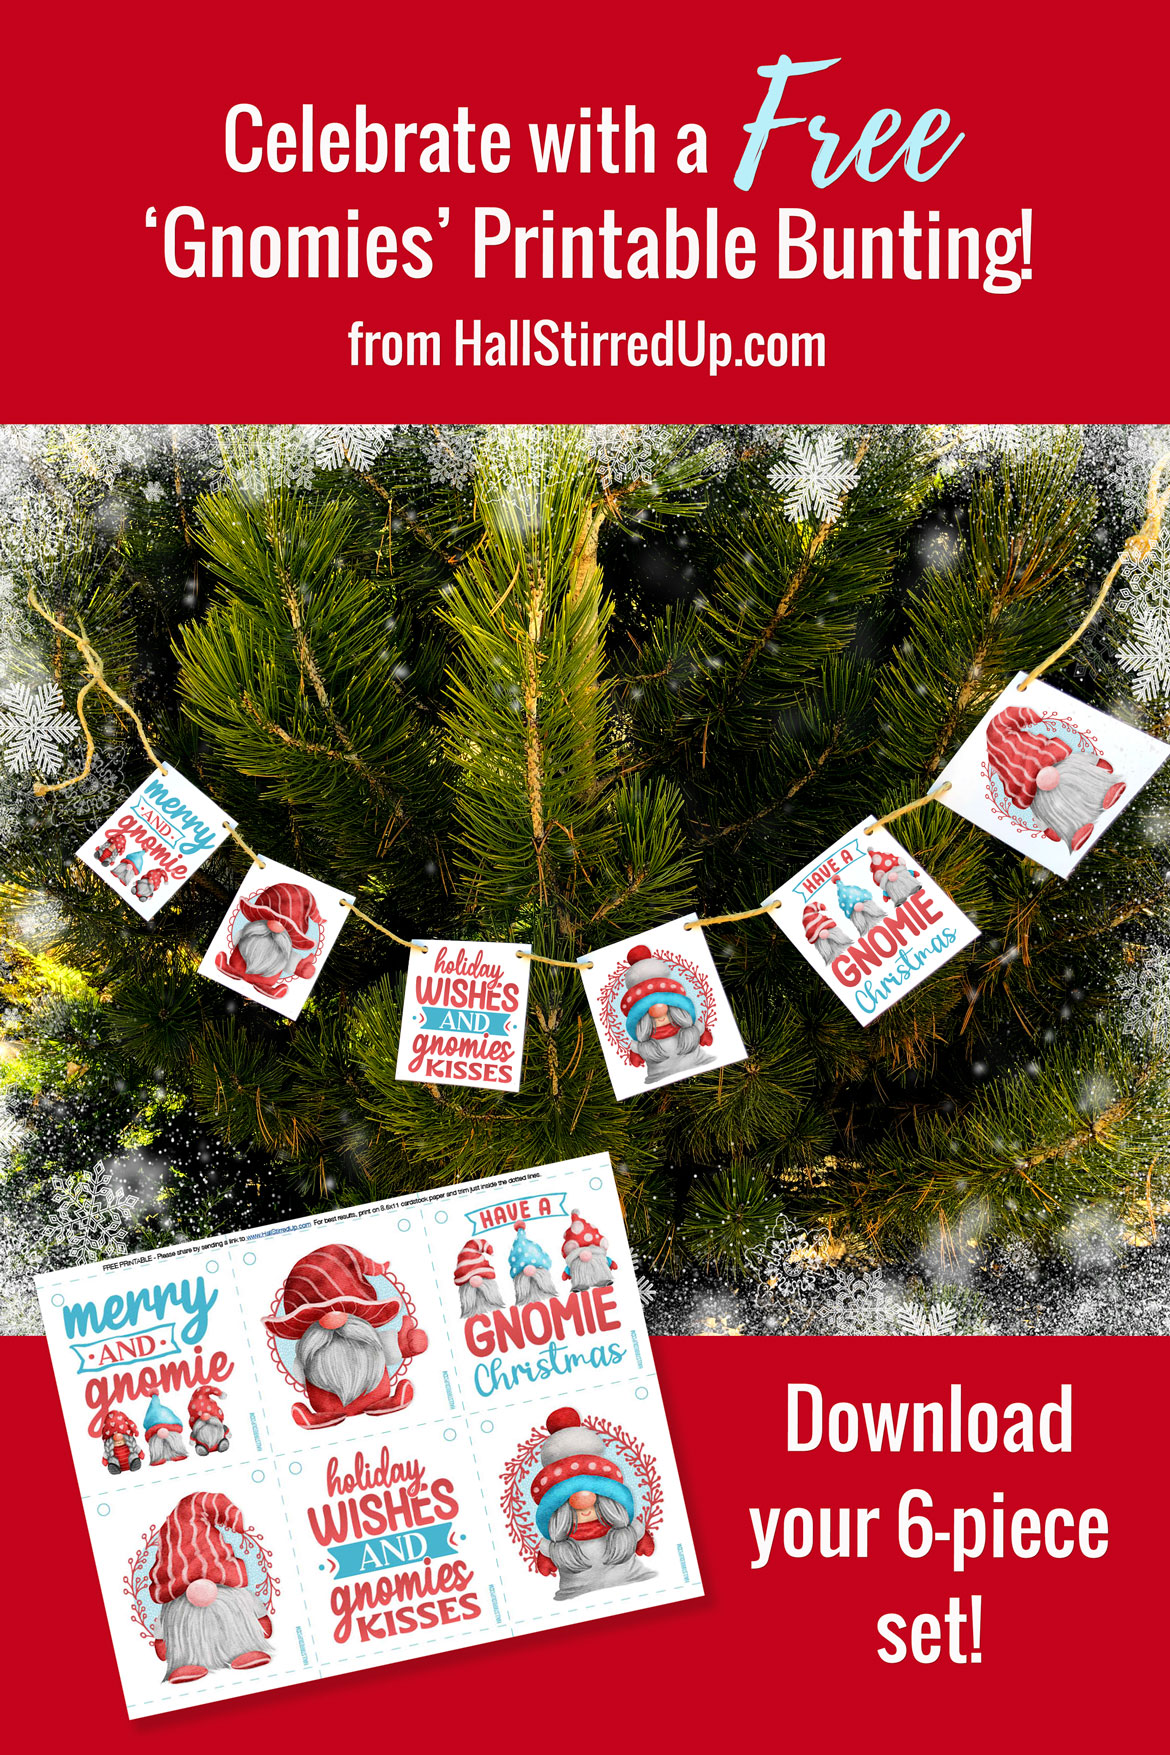 Celebrate with a free Gnomies printable bunting